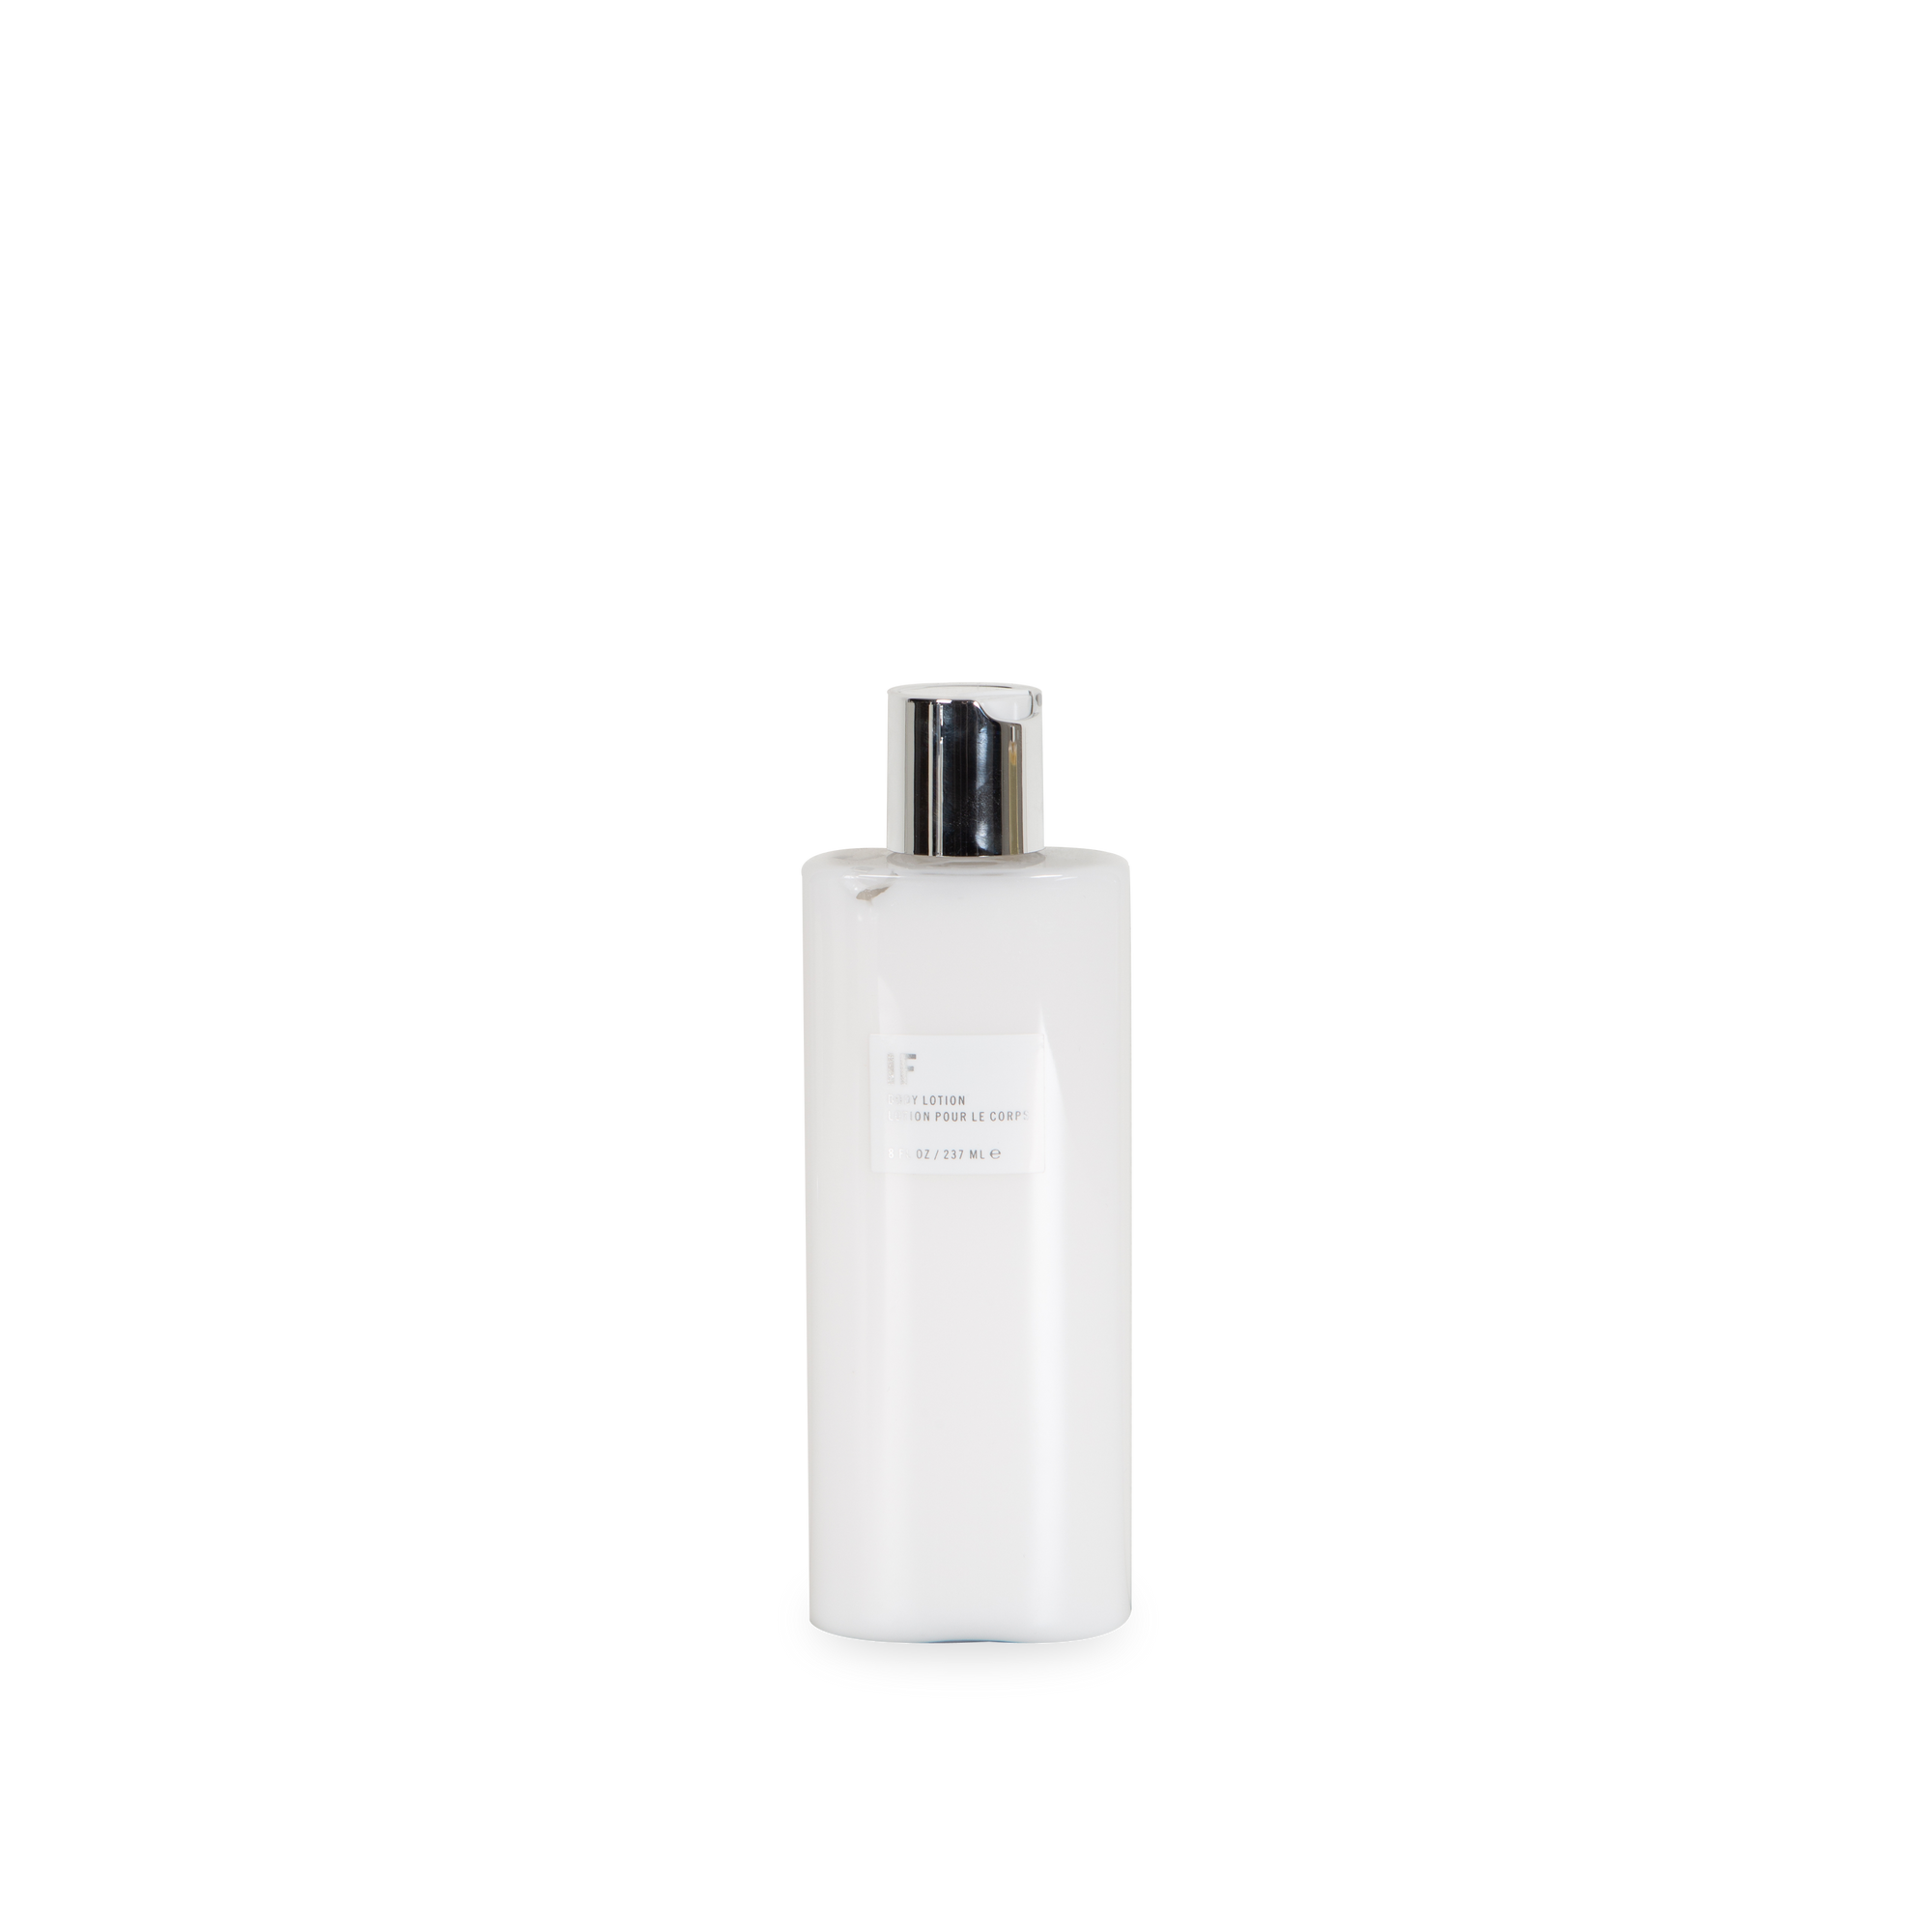 A modern light formula containing Aloe Vera, Shea Butter, Apricot Kernel, Matricaria flower and Vitamins A, C and E will leave skin feeling velvety smooth, soothed and nourished.